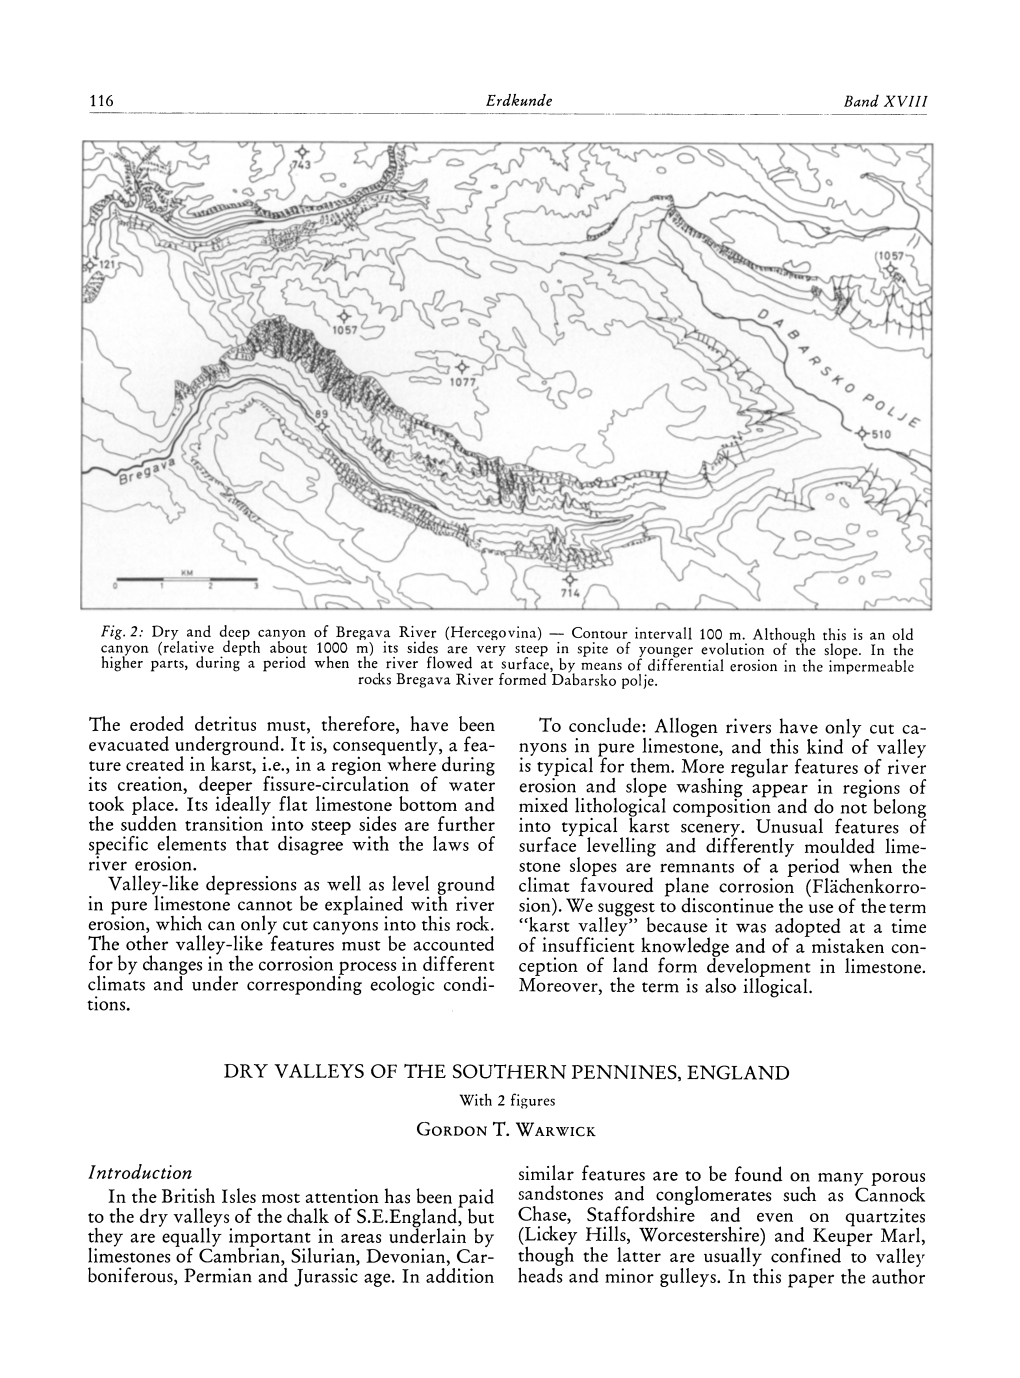 DRY VALLEYS of the SOUTHERN PENNINES, ENGLAND with 2 Figures Gordon T